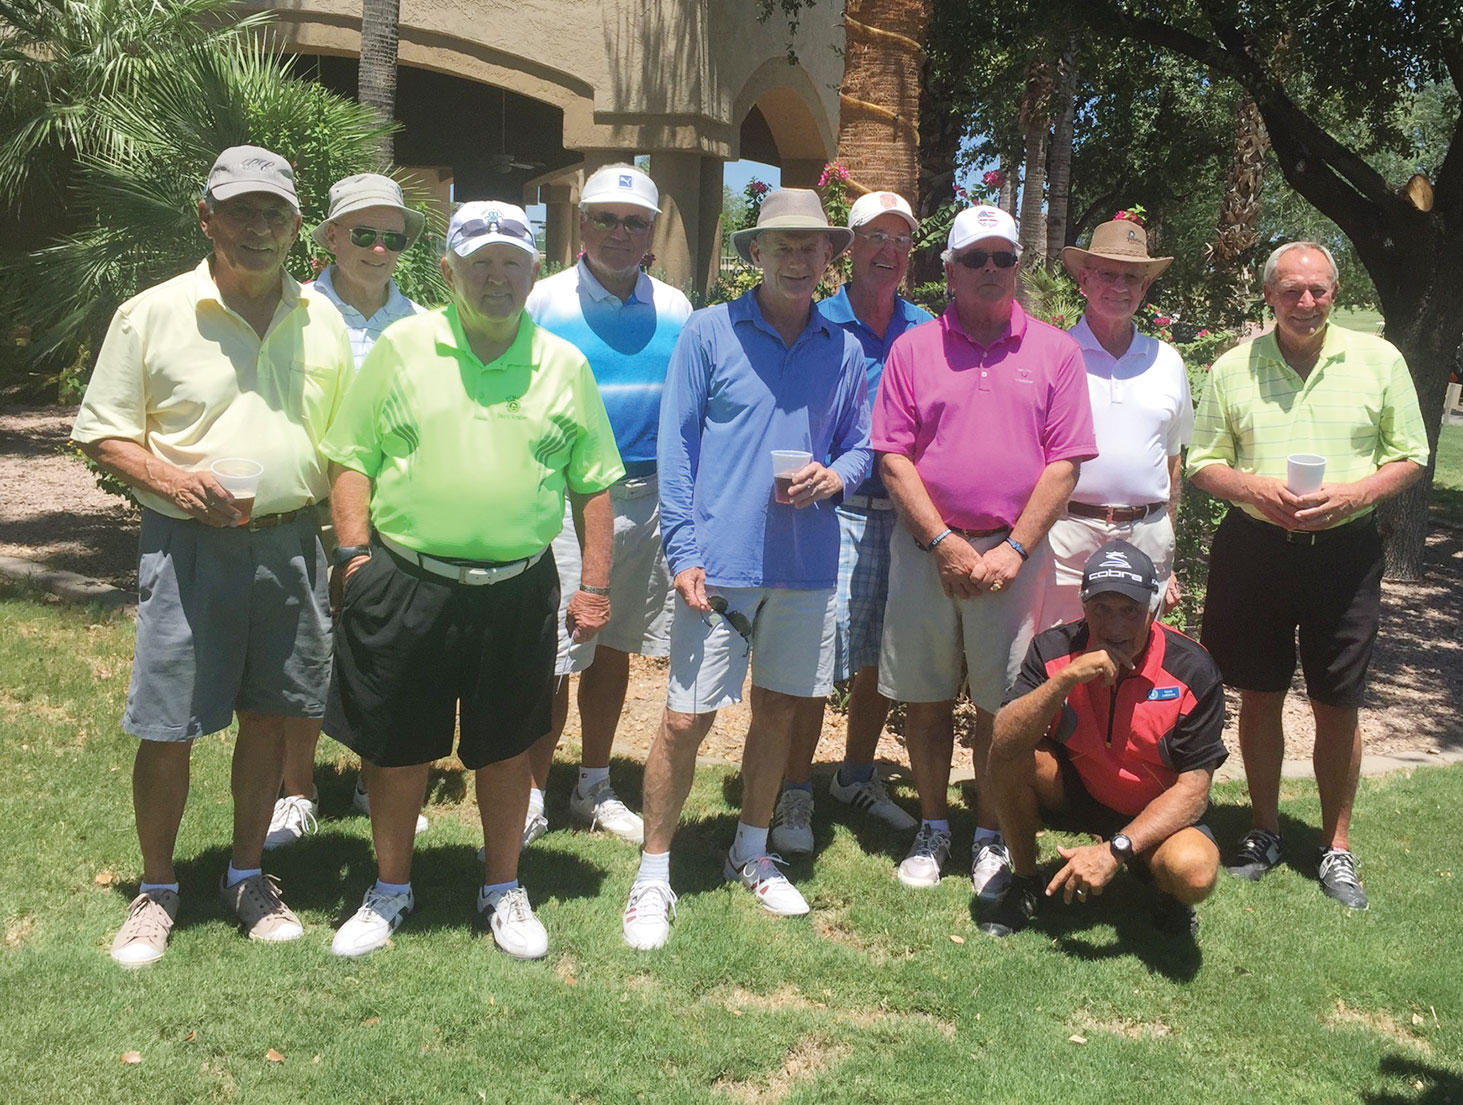 July 14 Mixer Tournament Winners, left to right: Jim Beyers, Lee McDonnell, Bill Schaefer, Ron Shrum, Jim Seth, B. Ruder, Dave Baseheart, Rene Lefebvre, Ray Measles and Stan Smith